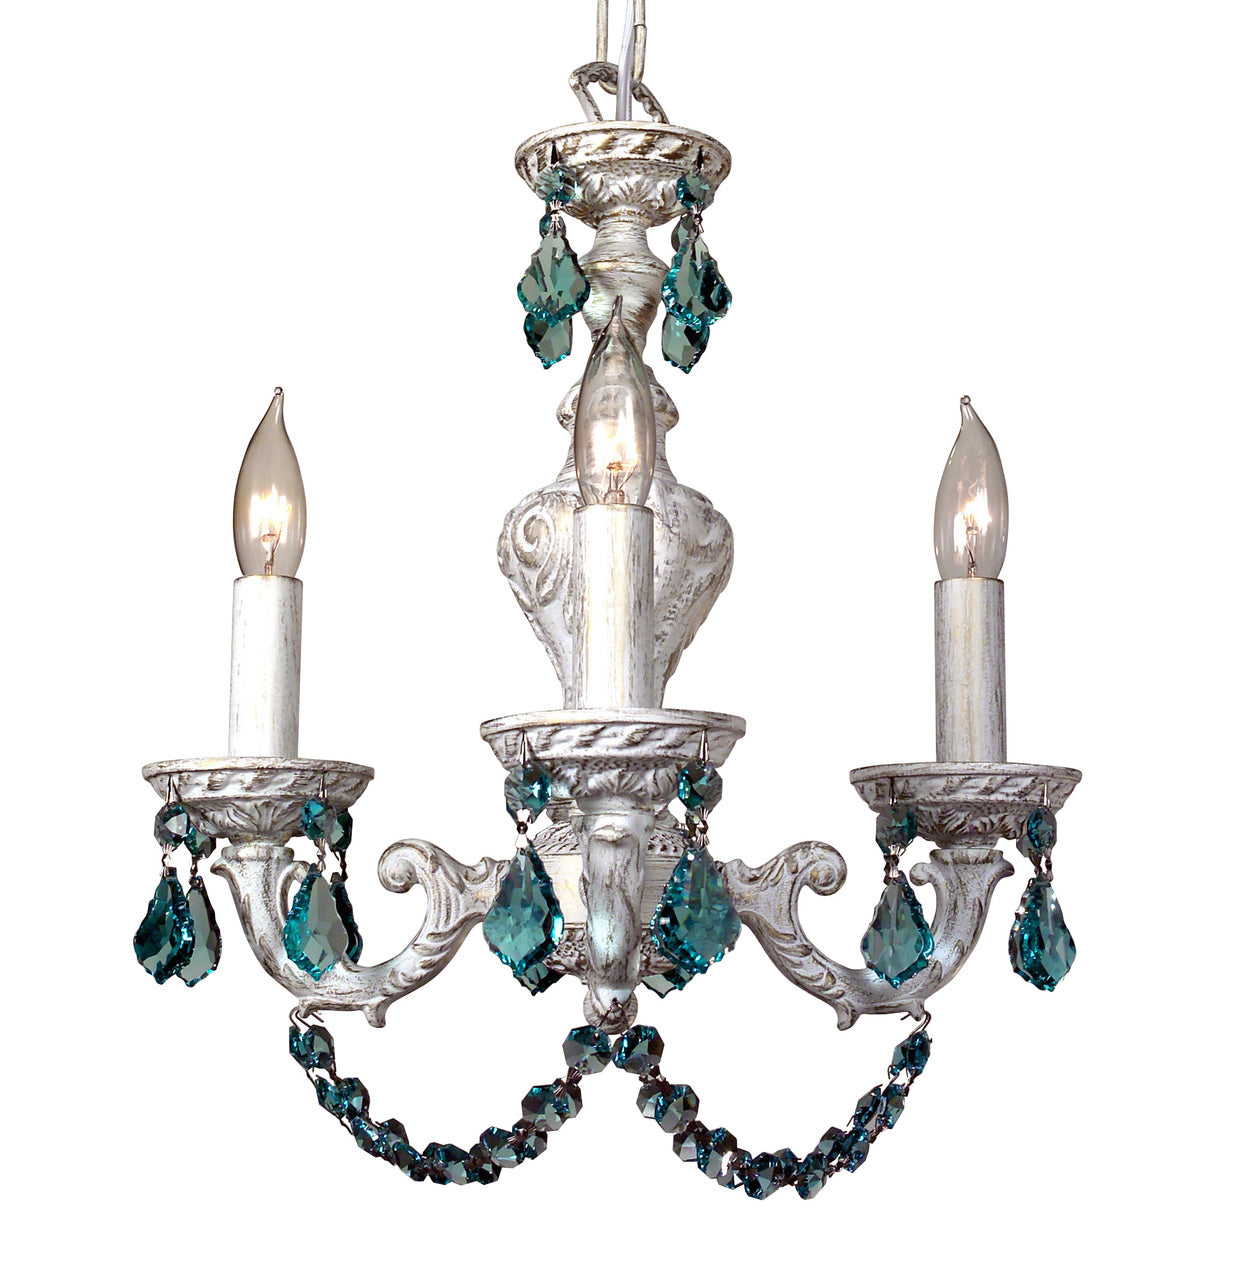 Classic Lighting 8335 AW AG Gabrielle Crystal Mini Chandelier in Antique White